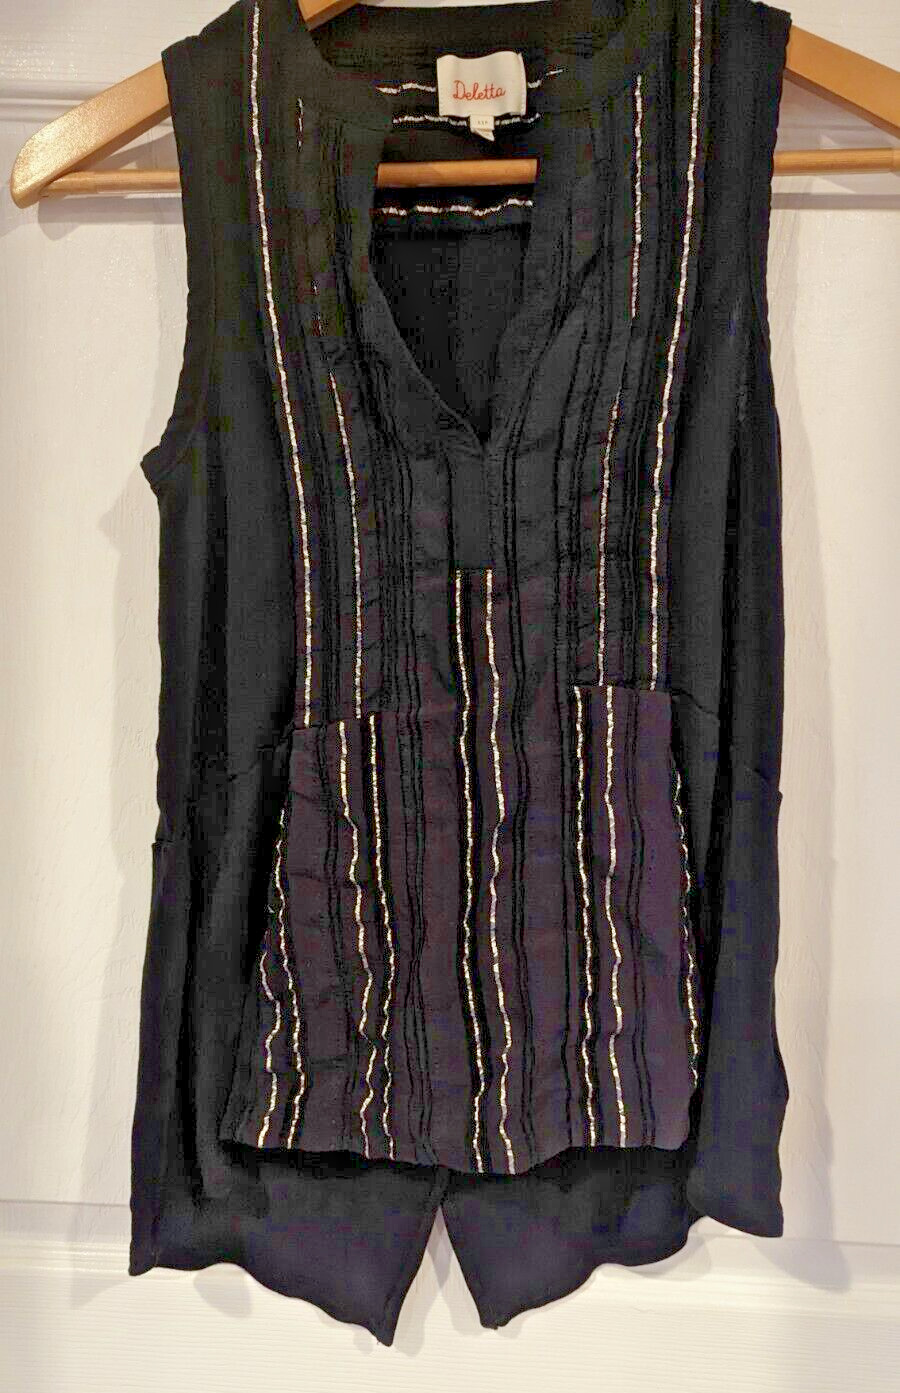 Deletta By Anthropology Black  Henley Tunic Metallic Thread With Tails Rock Glam